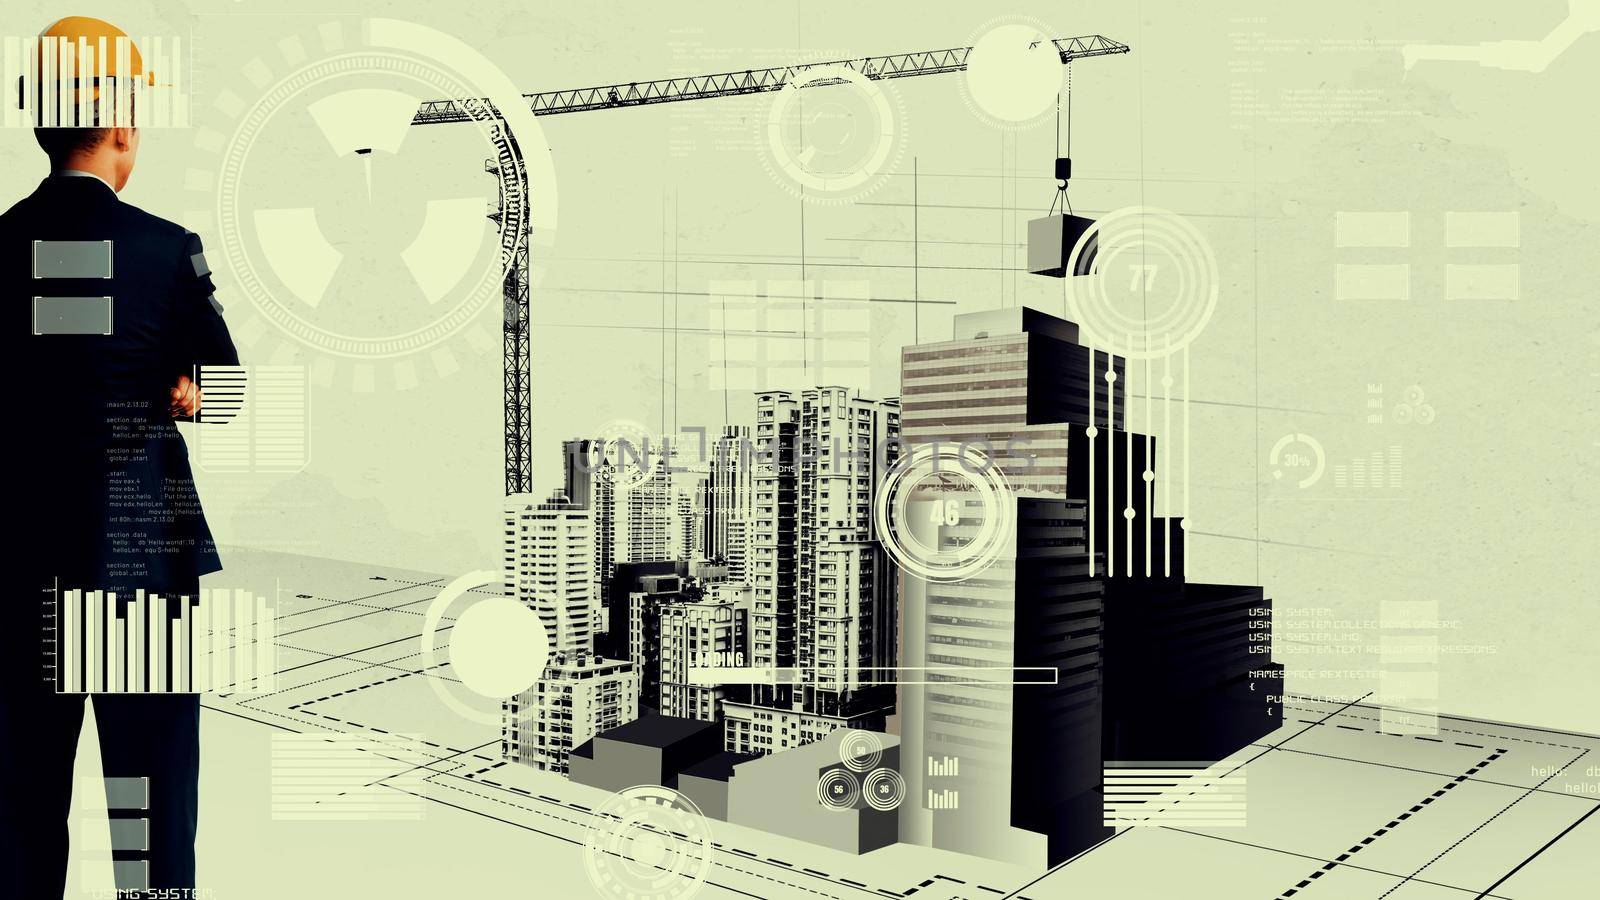 City civil planning and inventive real estate development by biancoblue